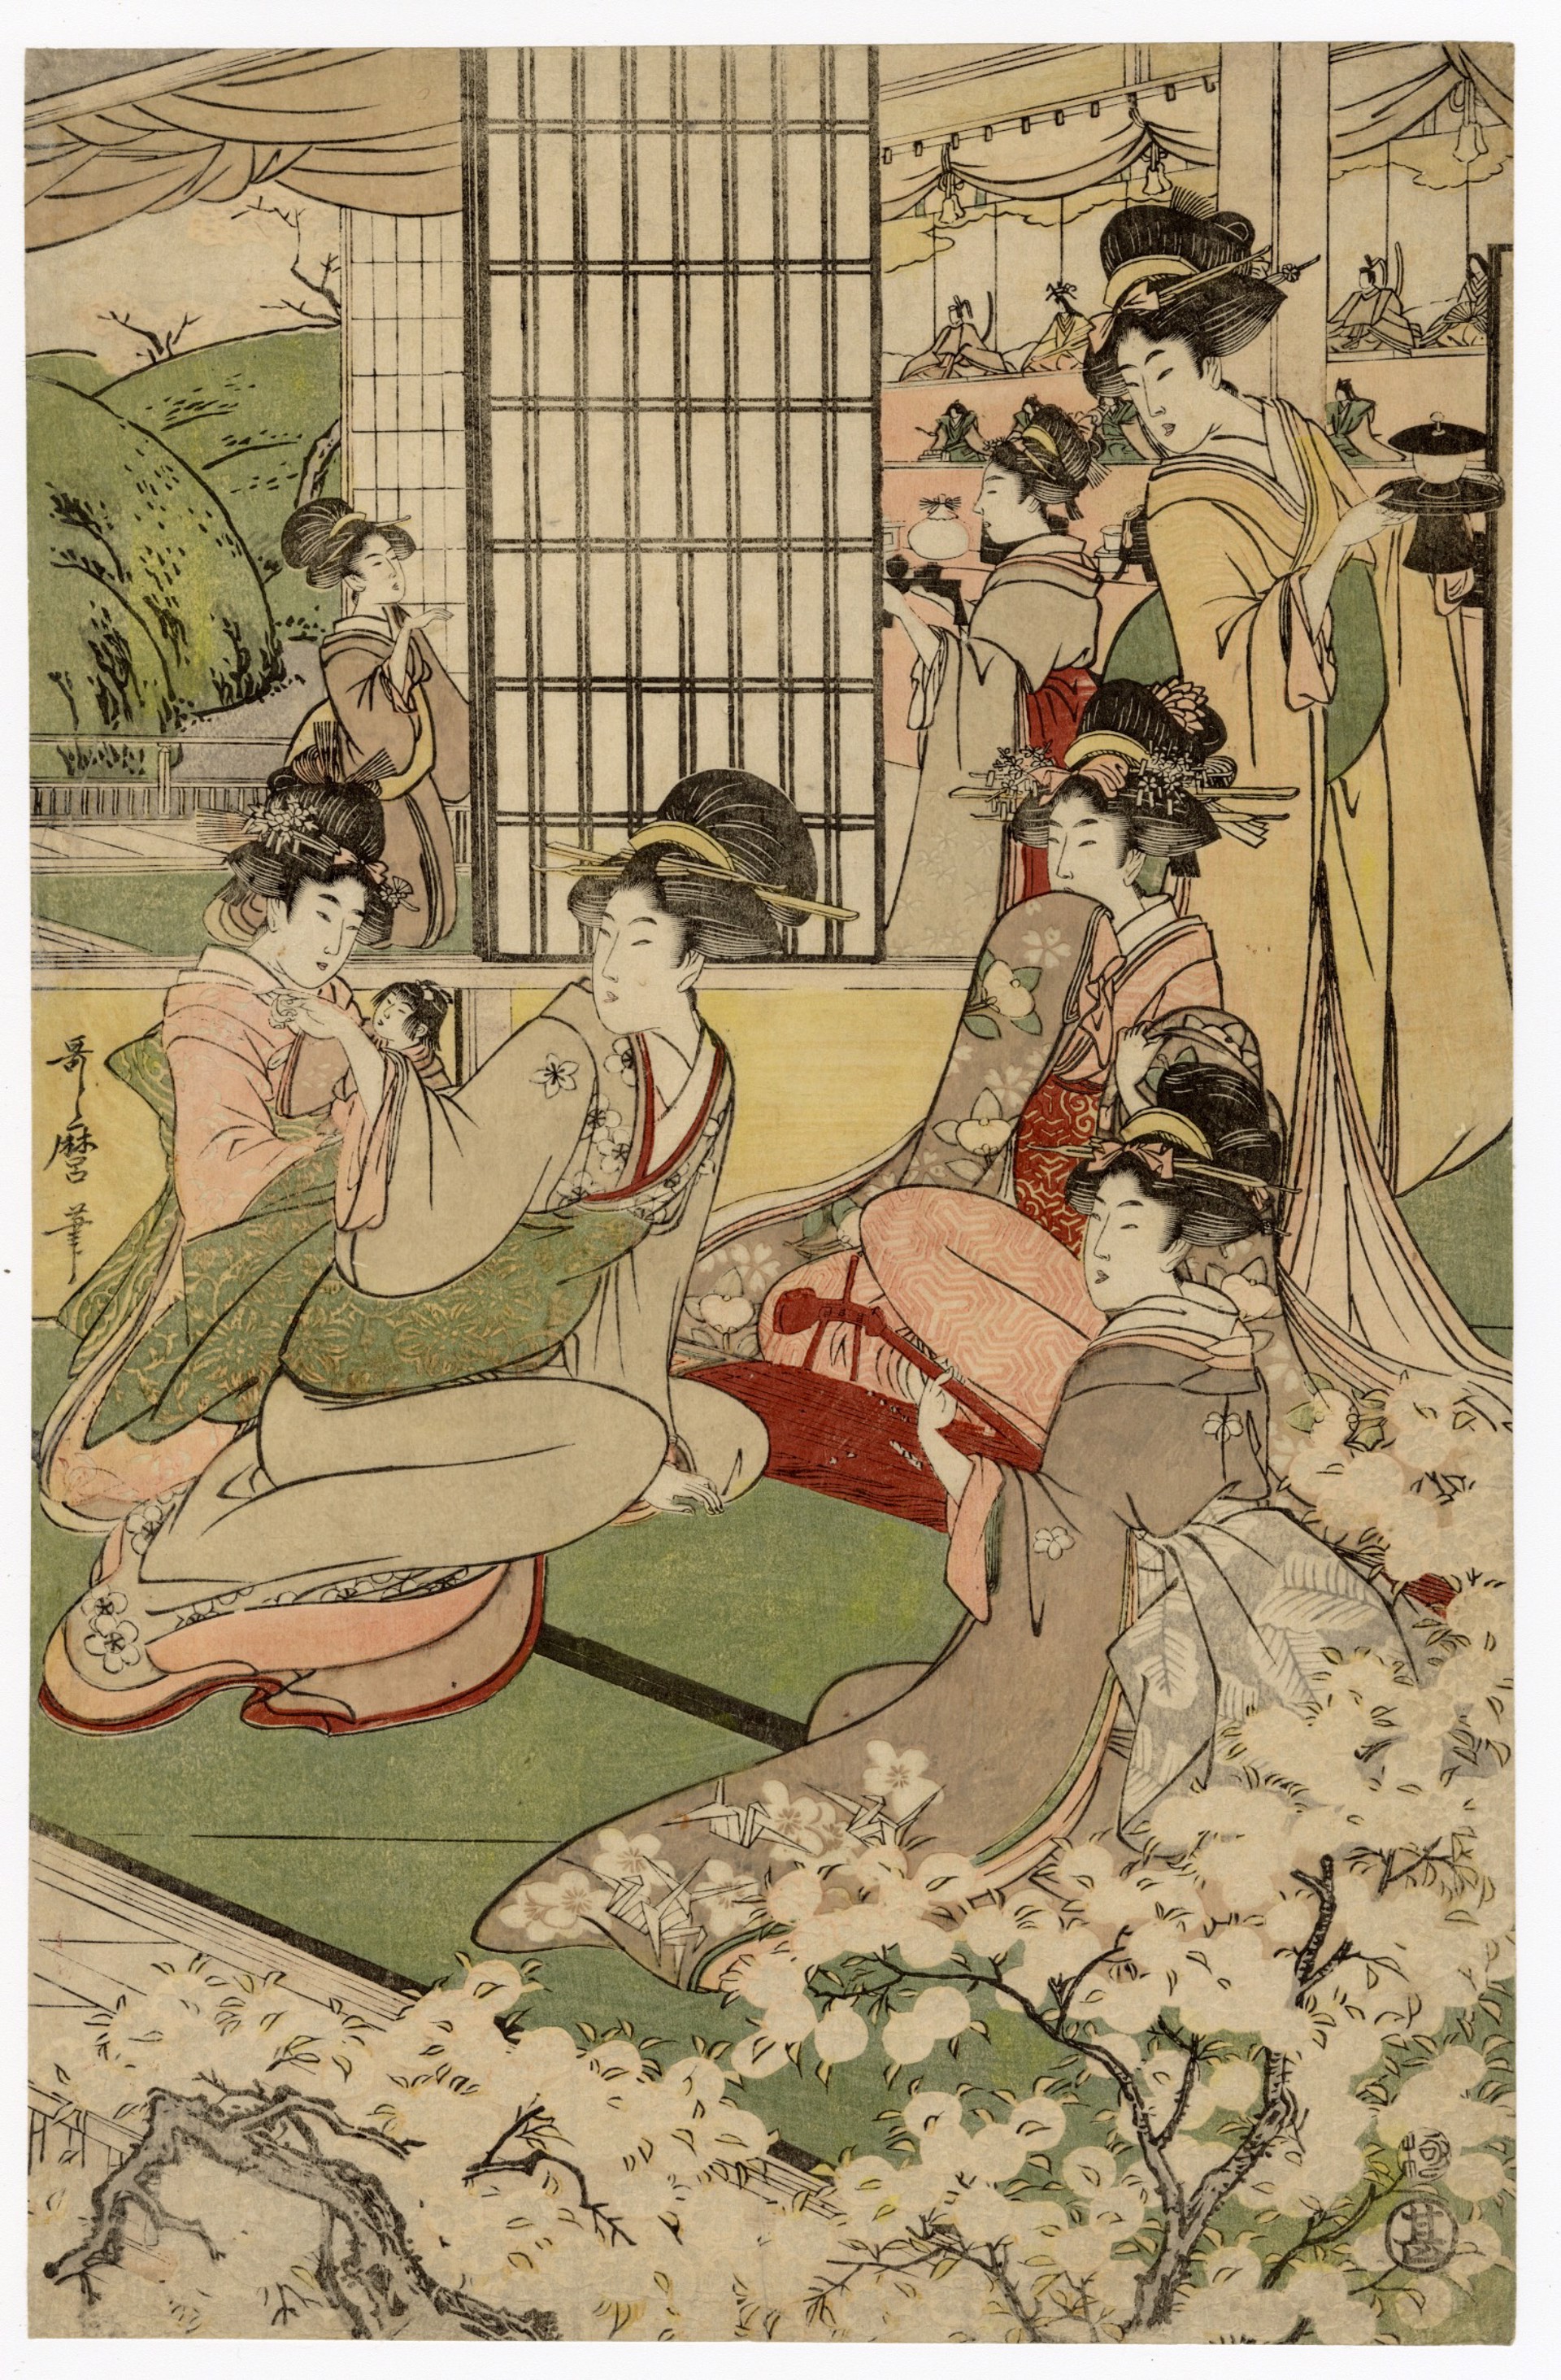 Beauties Viewing Cherry Blossoms from a Veranda by a River by Utamaro